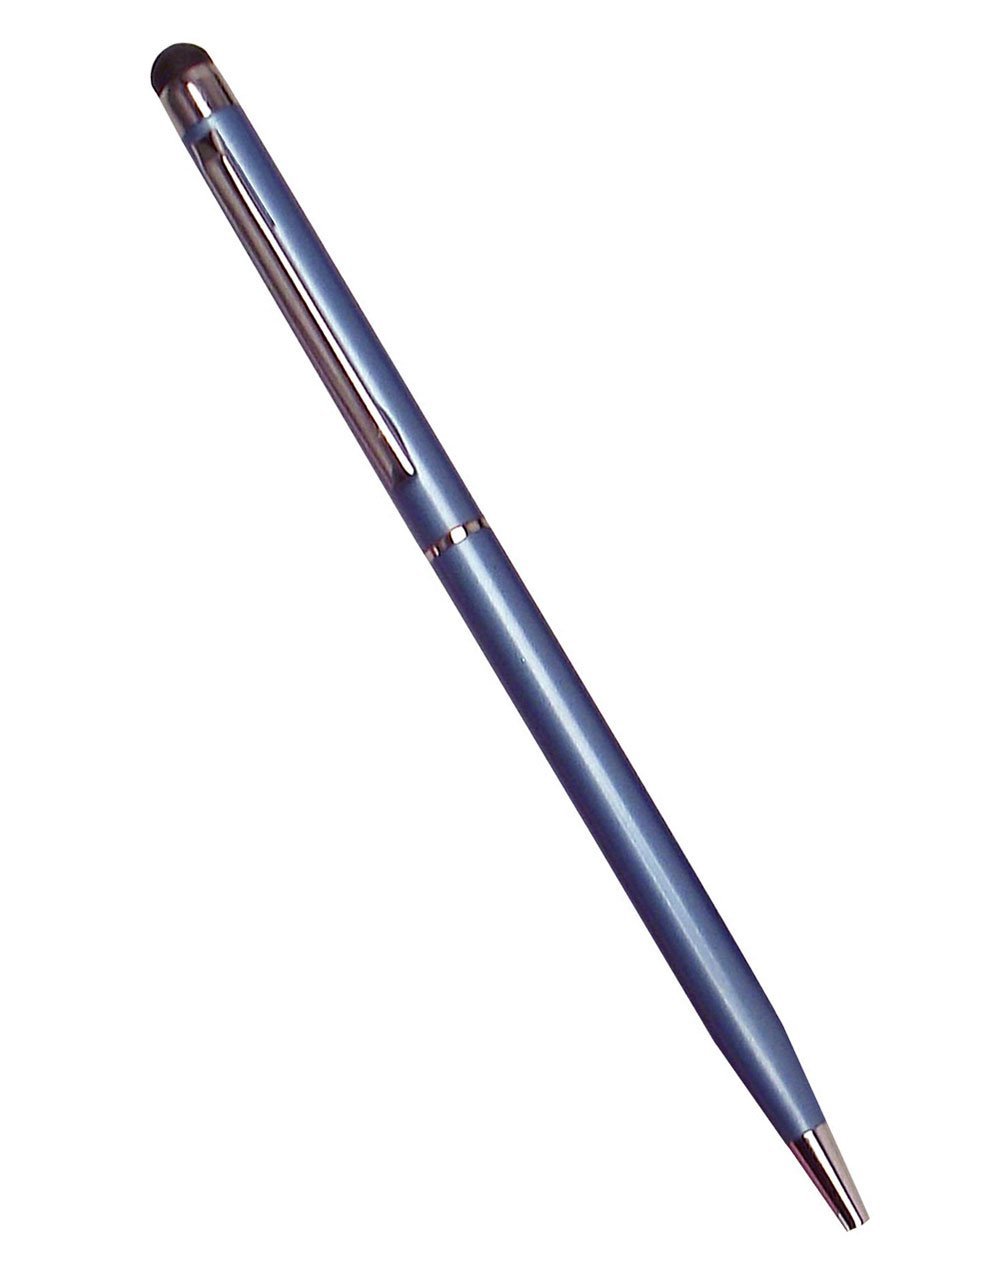 Shaxon Capacitive Stylus and Ball Point Pen Combo Designed to Work with All Capacitive Touch Screen Devices, Blue (SHX-Stylus-SIG-BU)